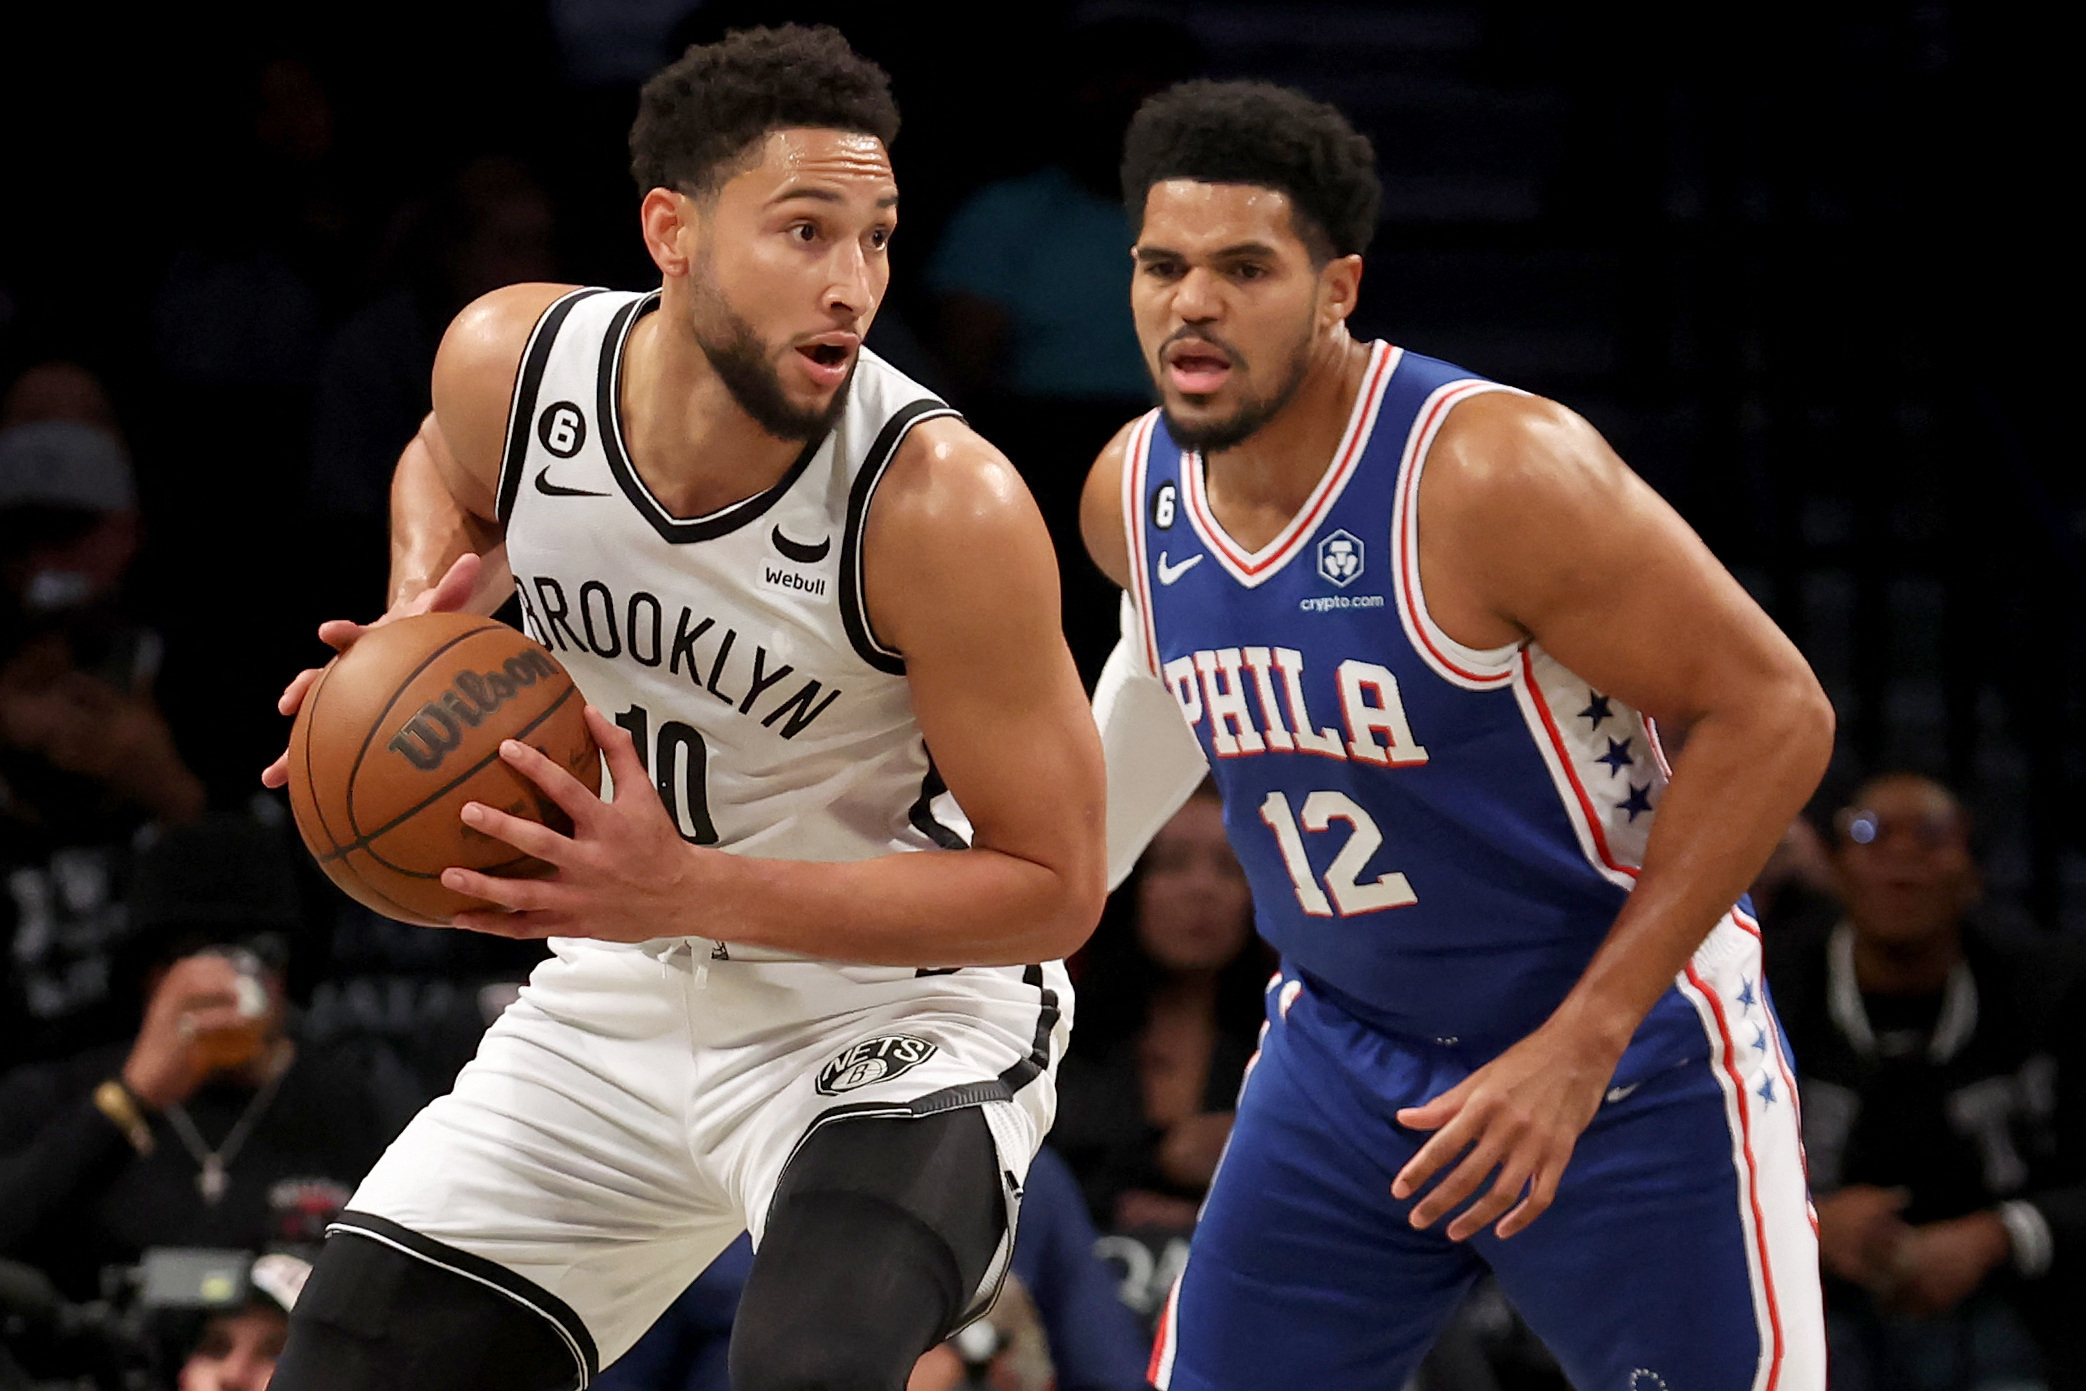 Oct 3, 2022; Brooklyn, New York, USA; Brooklyn Nets guard Ben Simmons (10) controls the ball against Philadelphia 76ers forward Tobias Harris (12) during the first quarter at Barclays Center. Mandatory Credit: Brad Penner-USA TODAY Sports